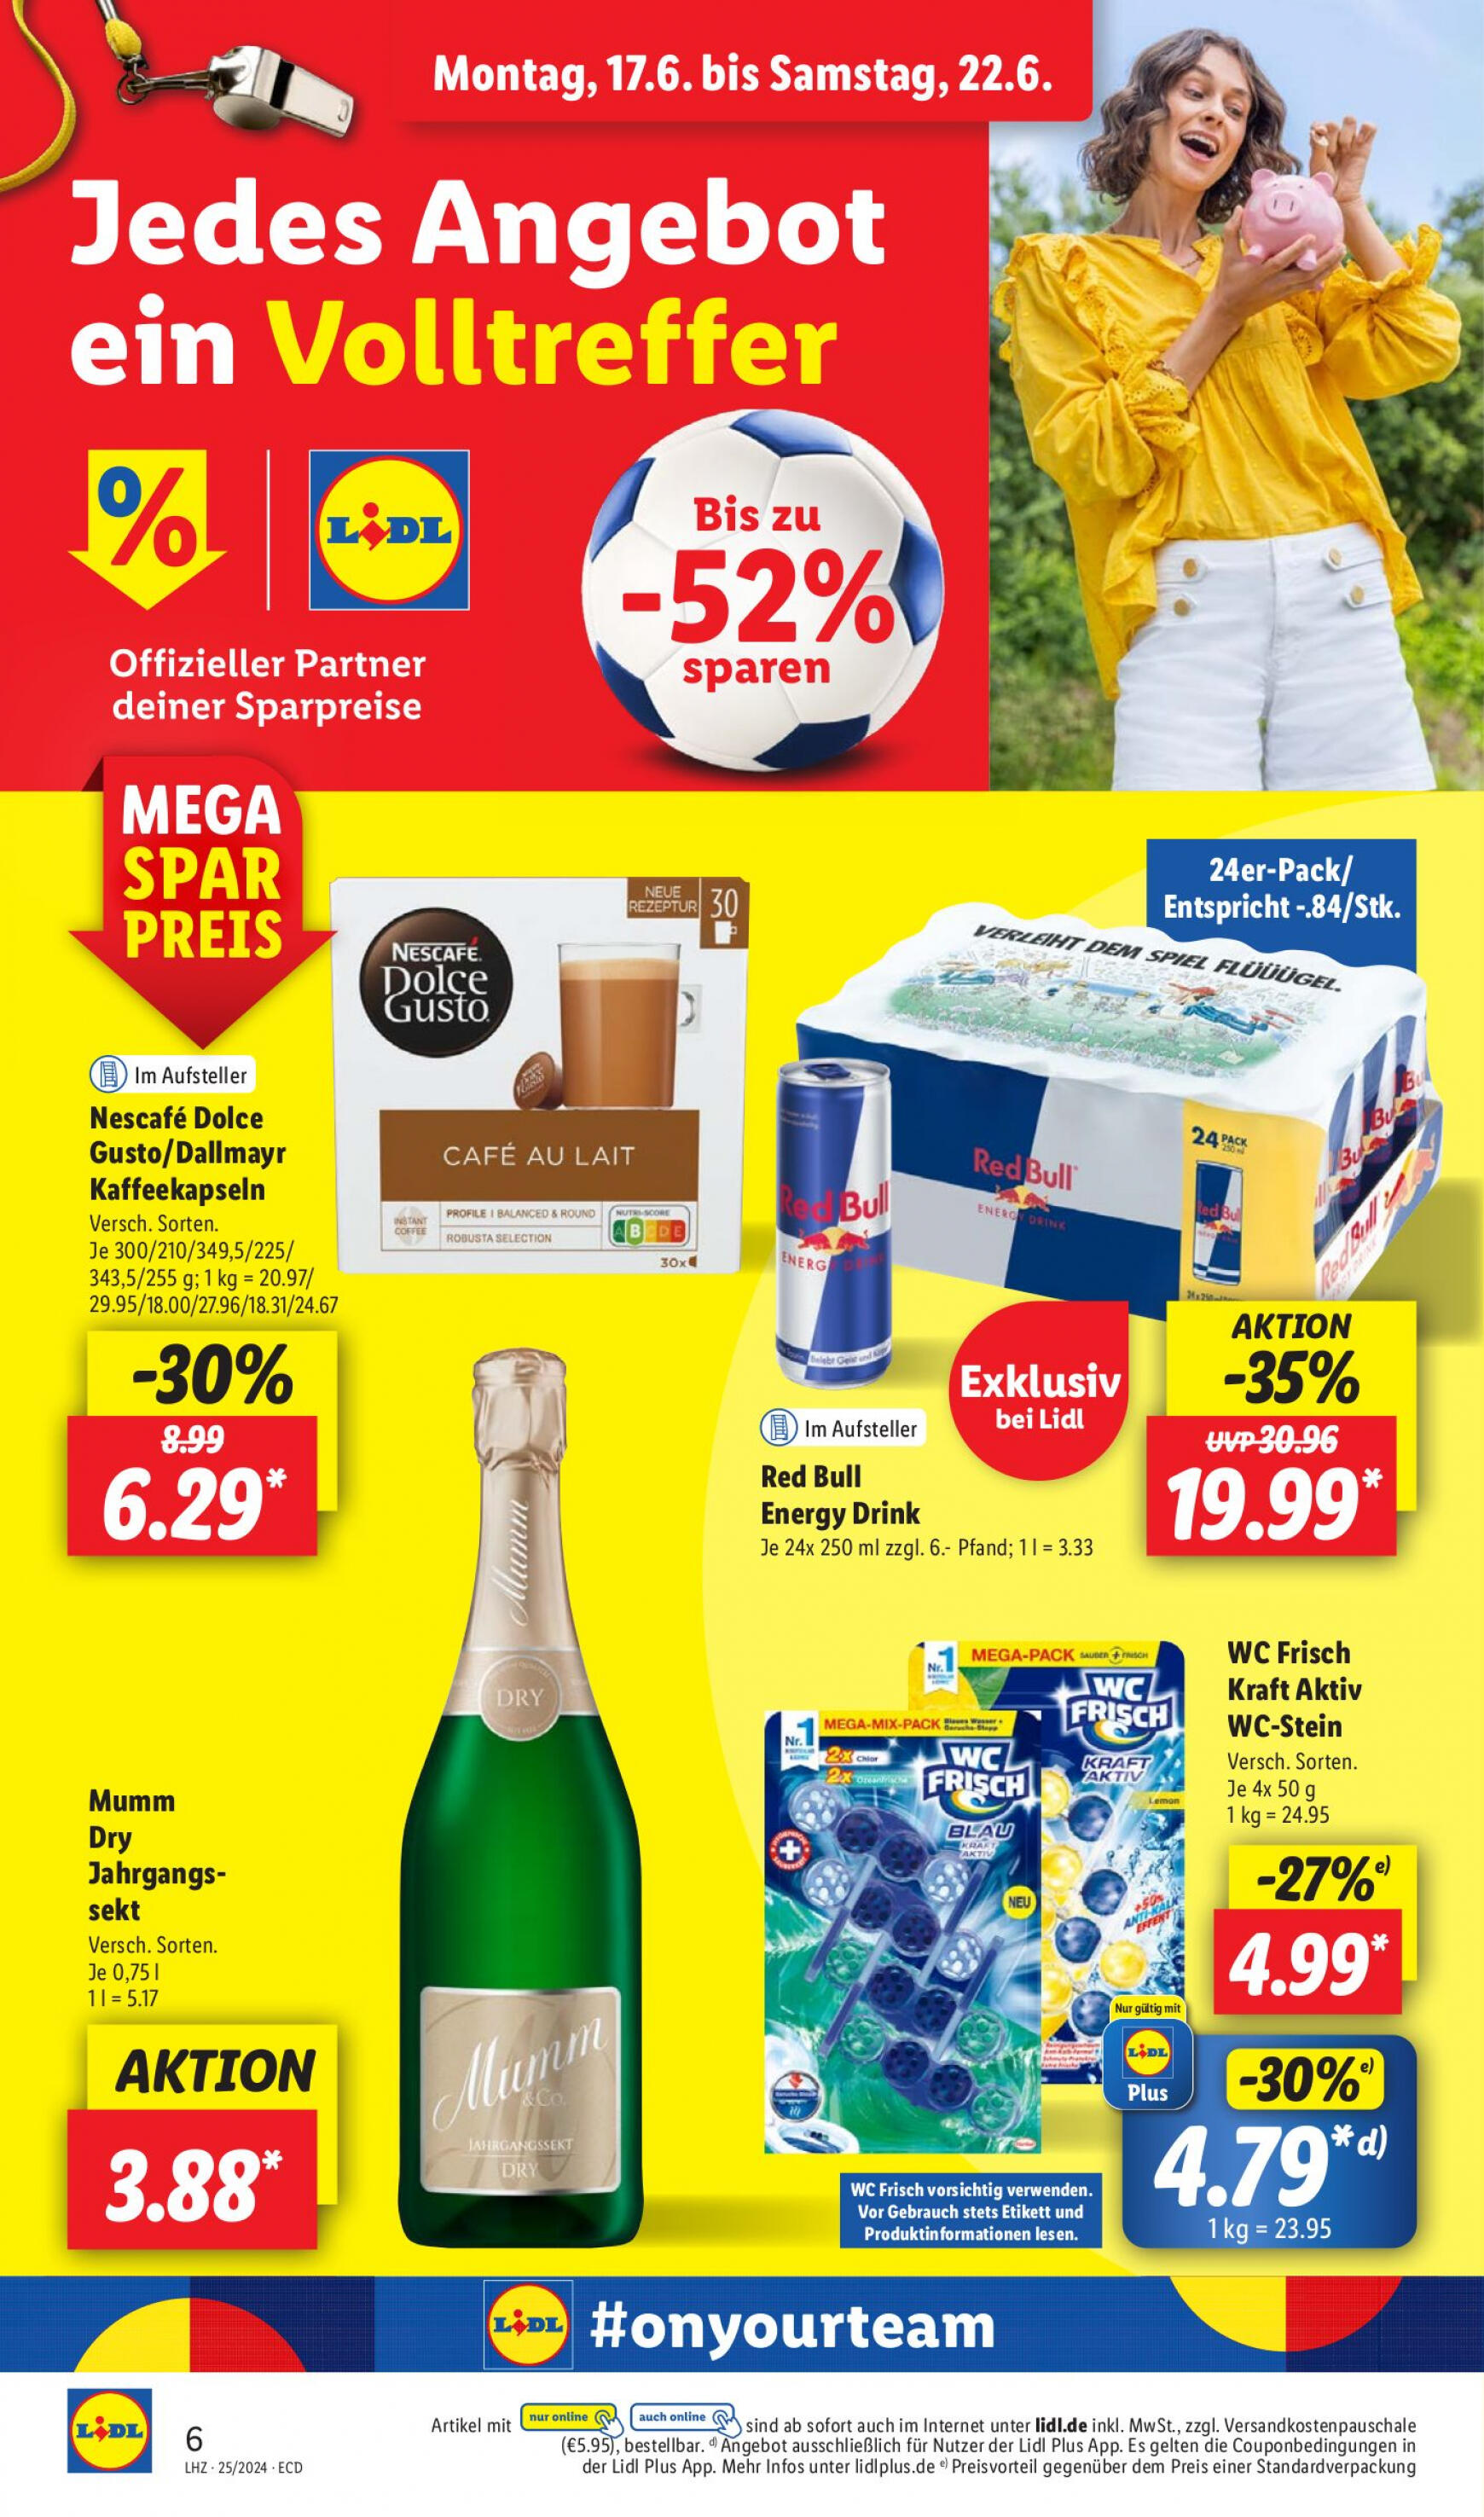 lidl - Flyer Lidl aktuell 17.06. - 22.06. - page: 10